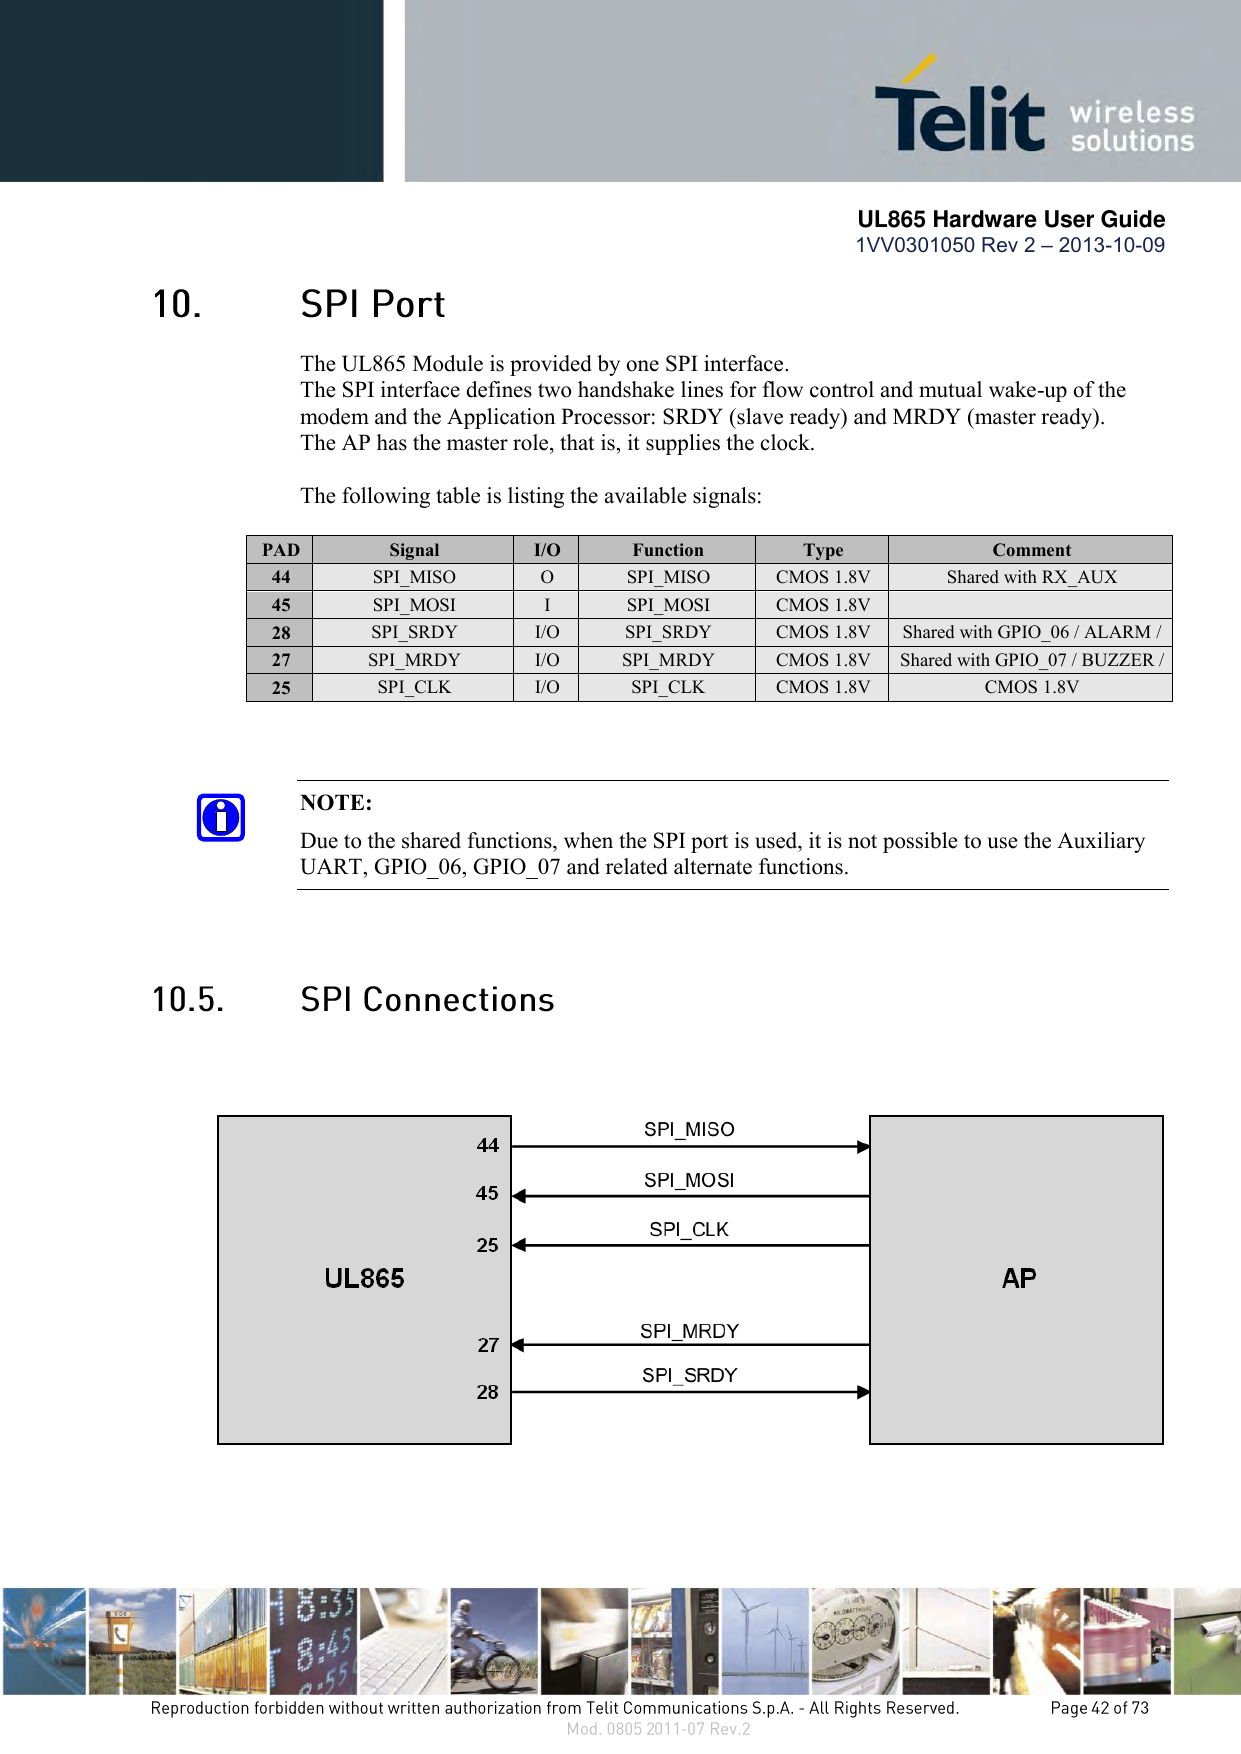       UL865 Hardware User Guide 1VV0301050 Rev 2 – 2013-10-09    The UL865 Module is provided by one SPI interface. The SPI interface defines two handshake lines for flow control and mutual wake-up of the  modem and the Application Processor: SRDY (slave ready) and MRDY (master ready). The AP has the master role, that is, it supplies the clock.  The following table is listing the available signals:  PAD Signal I/O Function Type Comment 44 SPI_MISO O SPI_MISO CMOS 1.8V Shared with RX_AUX 45 SPI_MOSI I SPI_MOSI CMOS 1.8V  28 SPI_SRDY I/O SPI_SRDY CMOS 1.8V Shared with GPIO_06 / ALARM / 27 SPI_MRDY I/O SPI_MRDY CMOS 1.8V Shared with GPIO_07 / BUZZER / 25 SPI_CLK I/O SPI_CLK CMOS 1.8V CMOS 1.8V   NOTE: Due to the shared functions, when the SPI port is used, it is not possible to use the Auxiliary UART, GPIO_06, GPIO_07 and related alternate functions.     